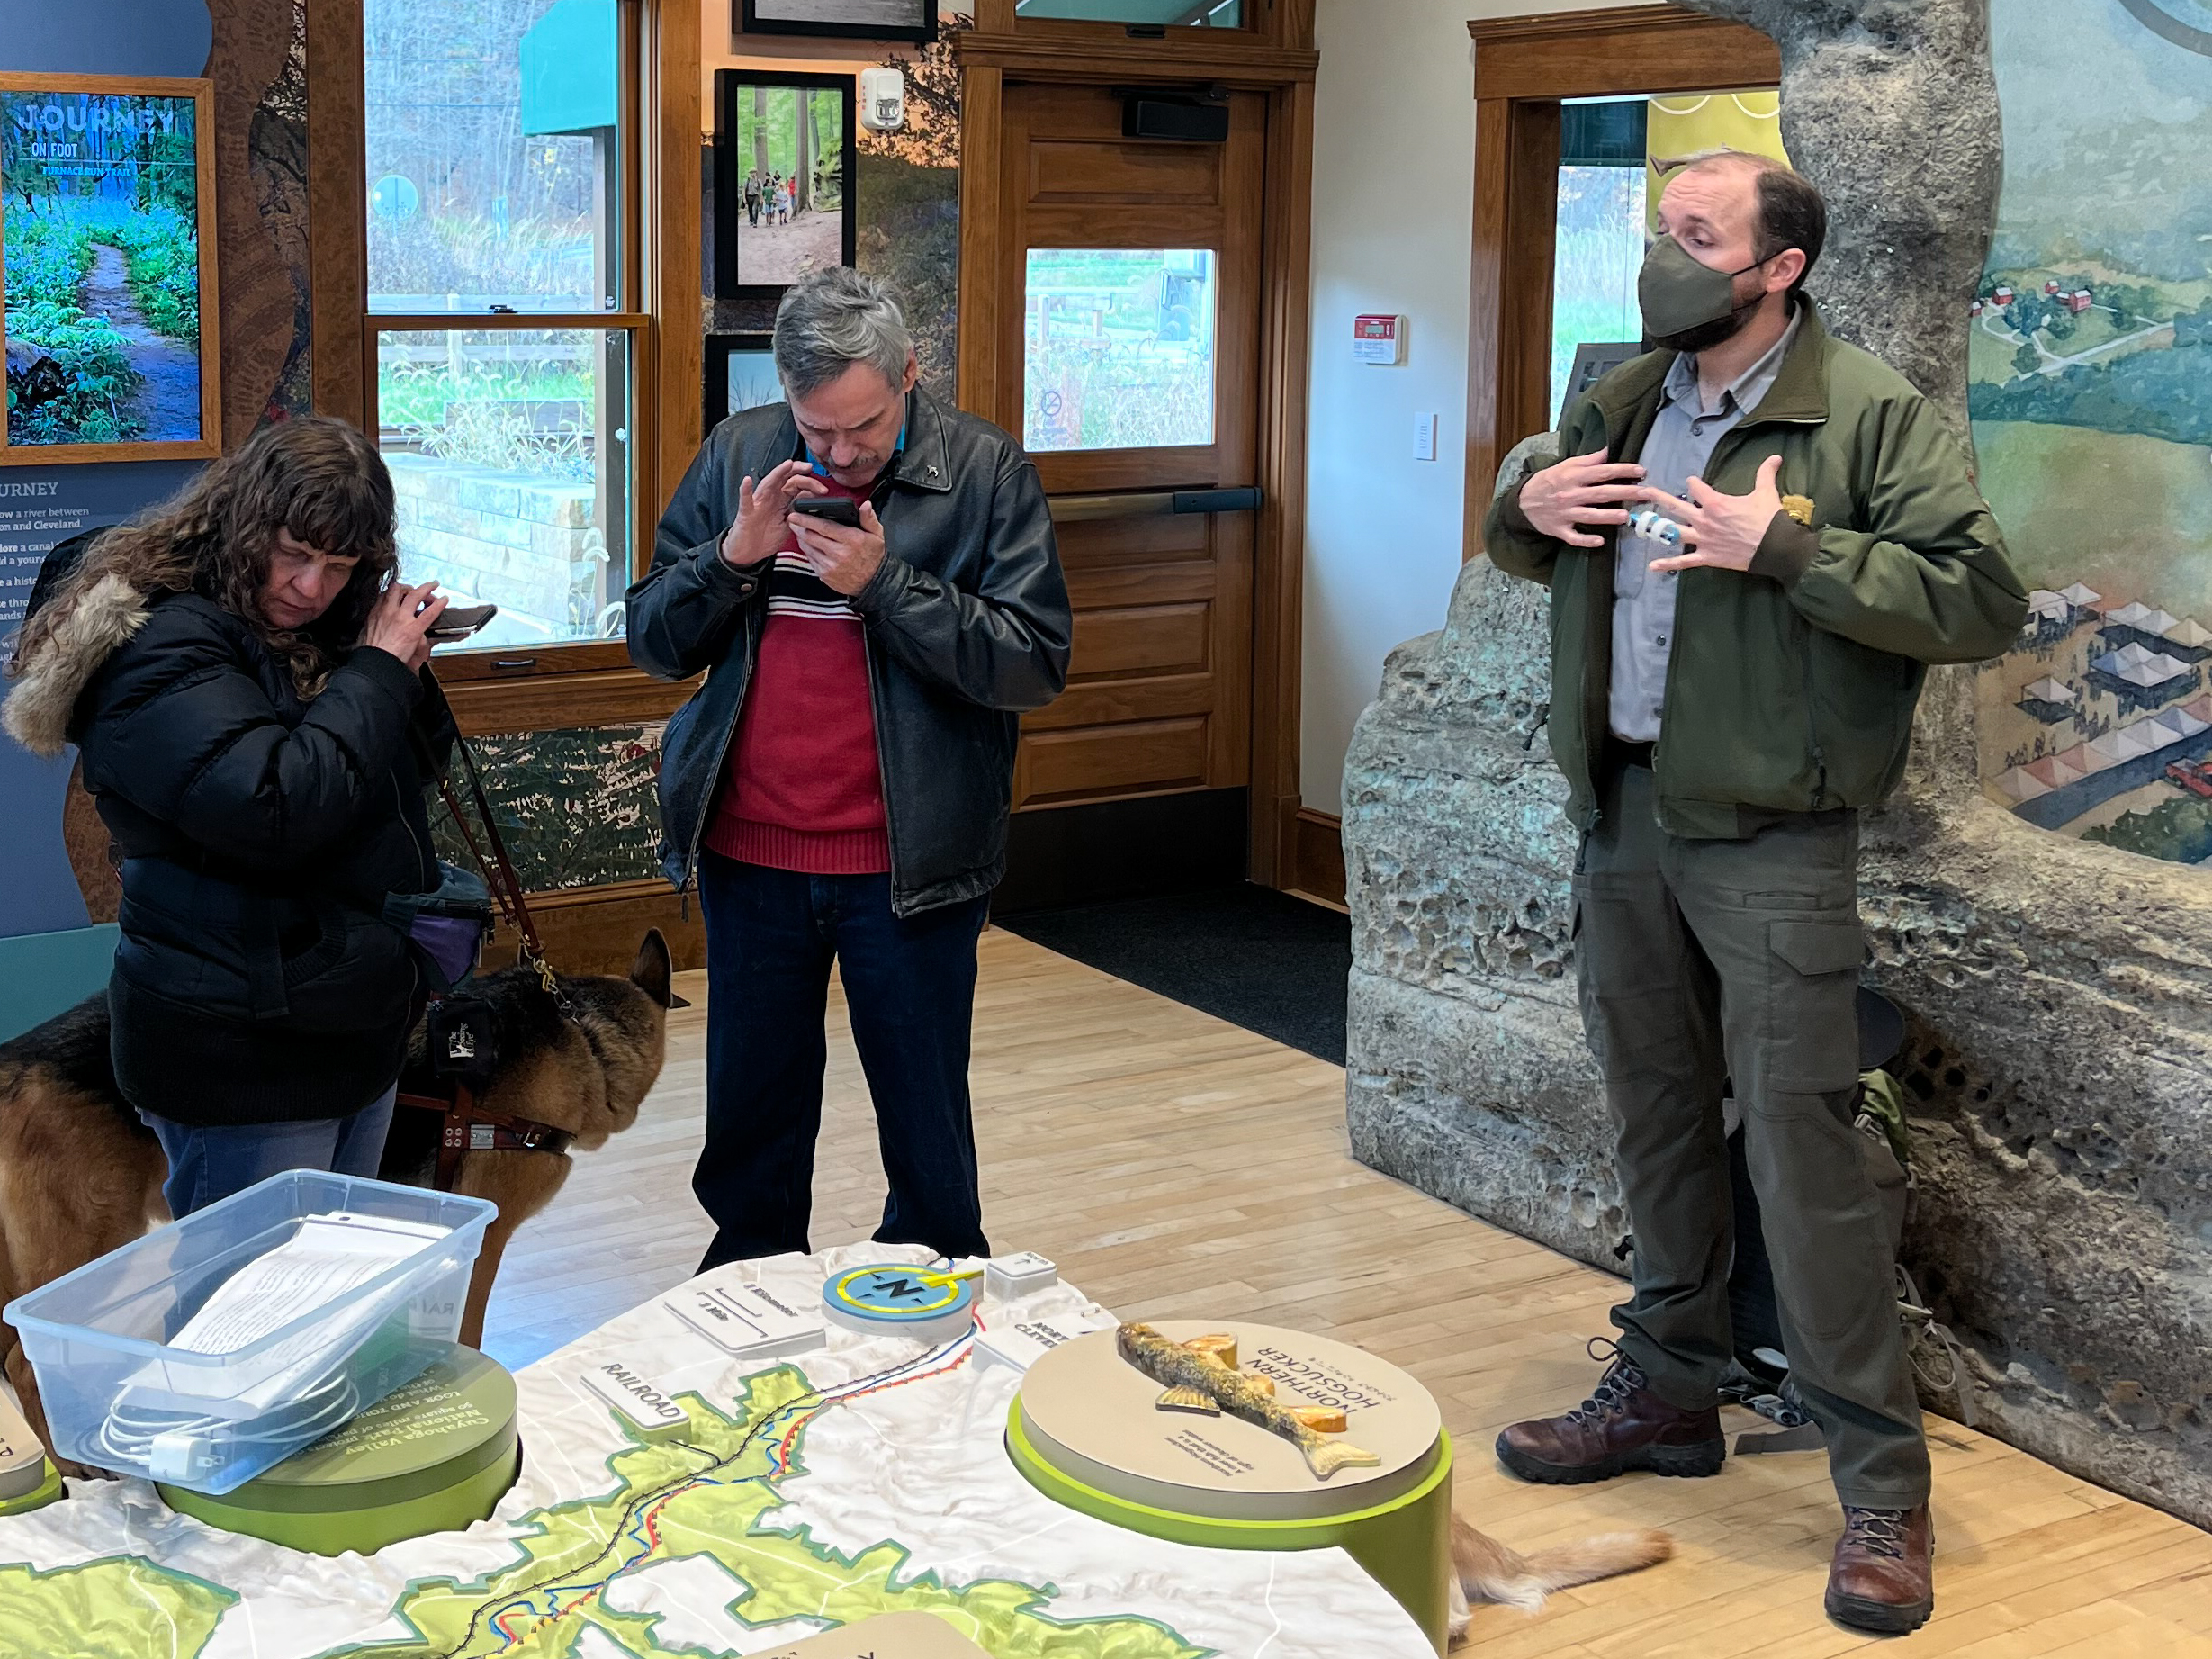 Photo of Testing Audio Description: Cuyahoga Valley National Park in Ohio welcomed our group of Cleveland Sight Center volunteers to study Audio Description on site (2023)